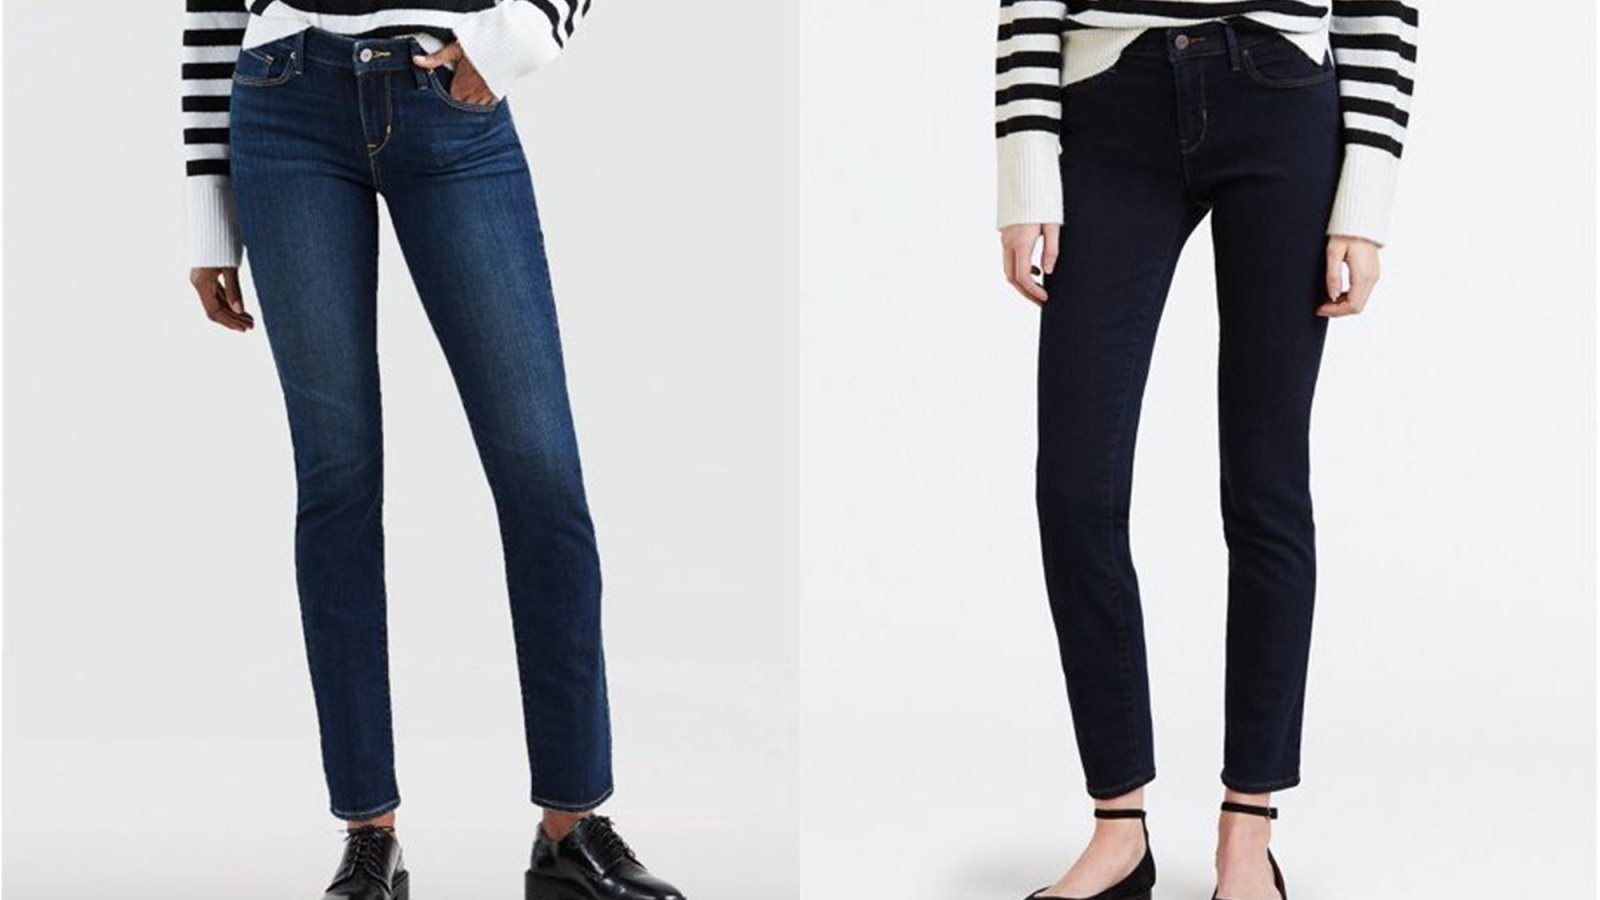 Levi’s Skinny Jeans Are 65% Off at Walmart — Limited Time Only